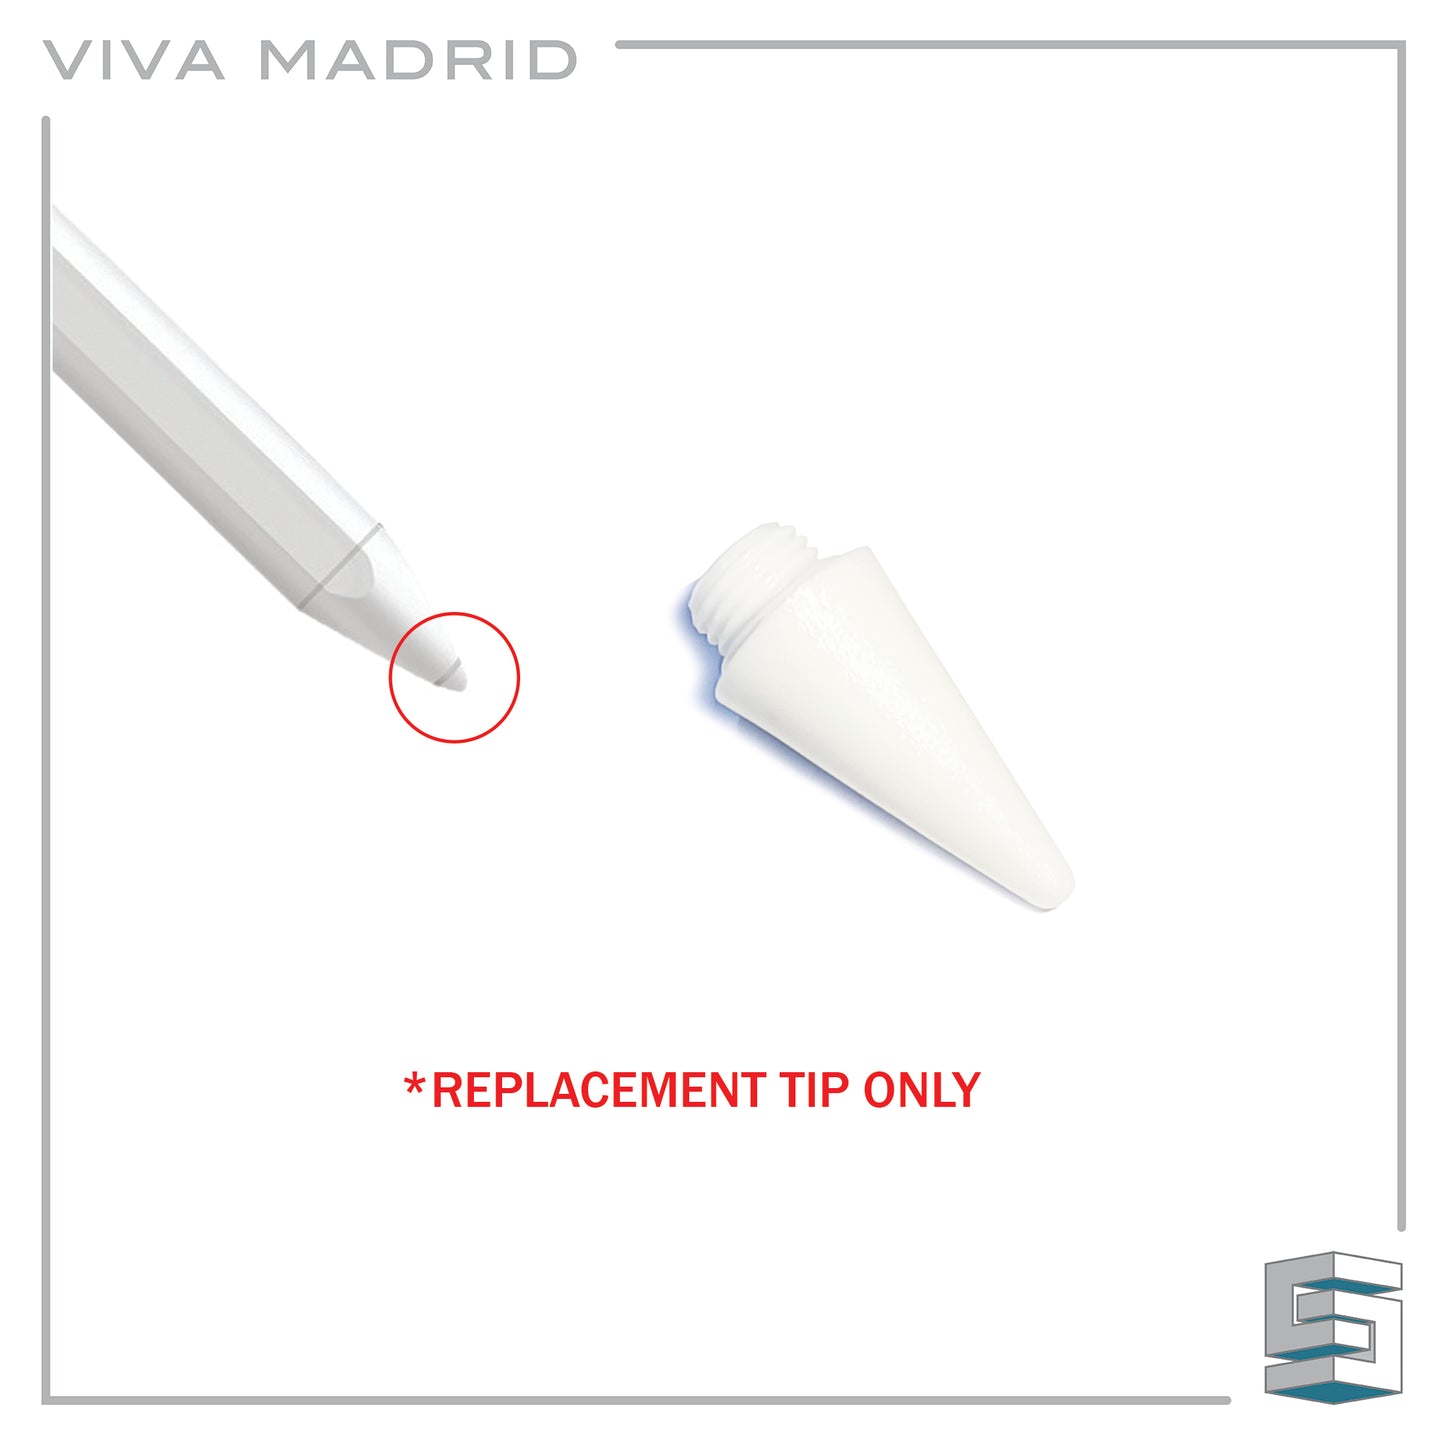 Stylus Pencil Tip - VIVA MADRID Glide+ Replacement Tip Global Synergy Concepts